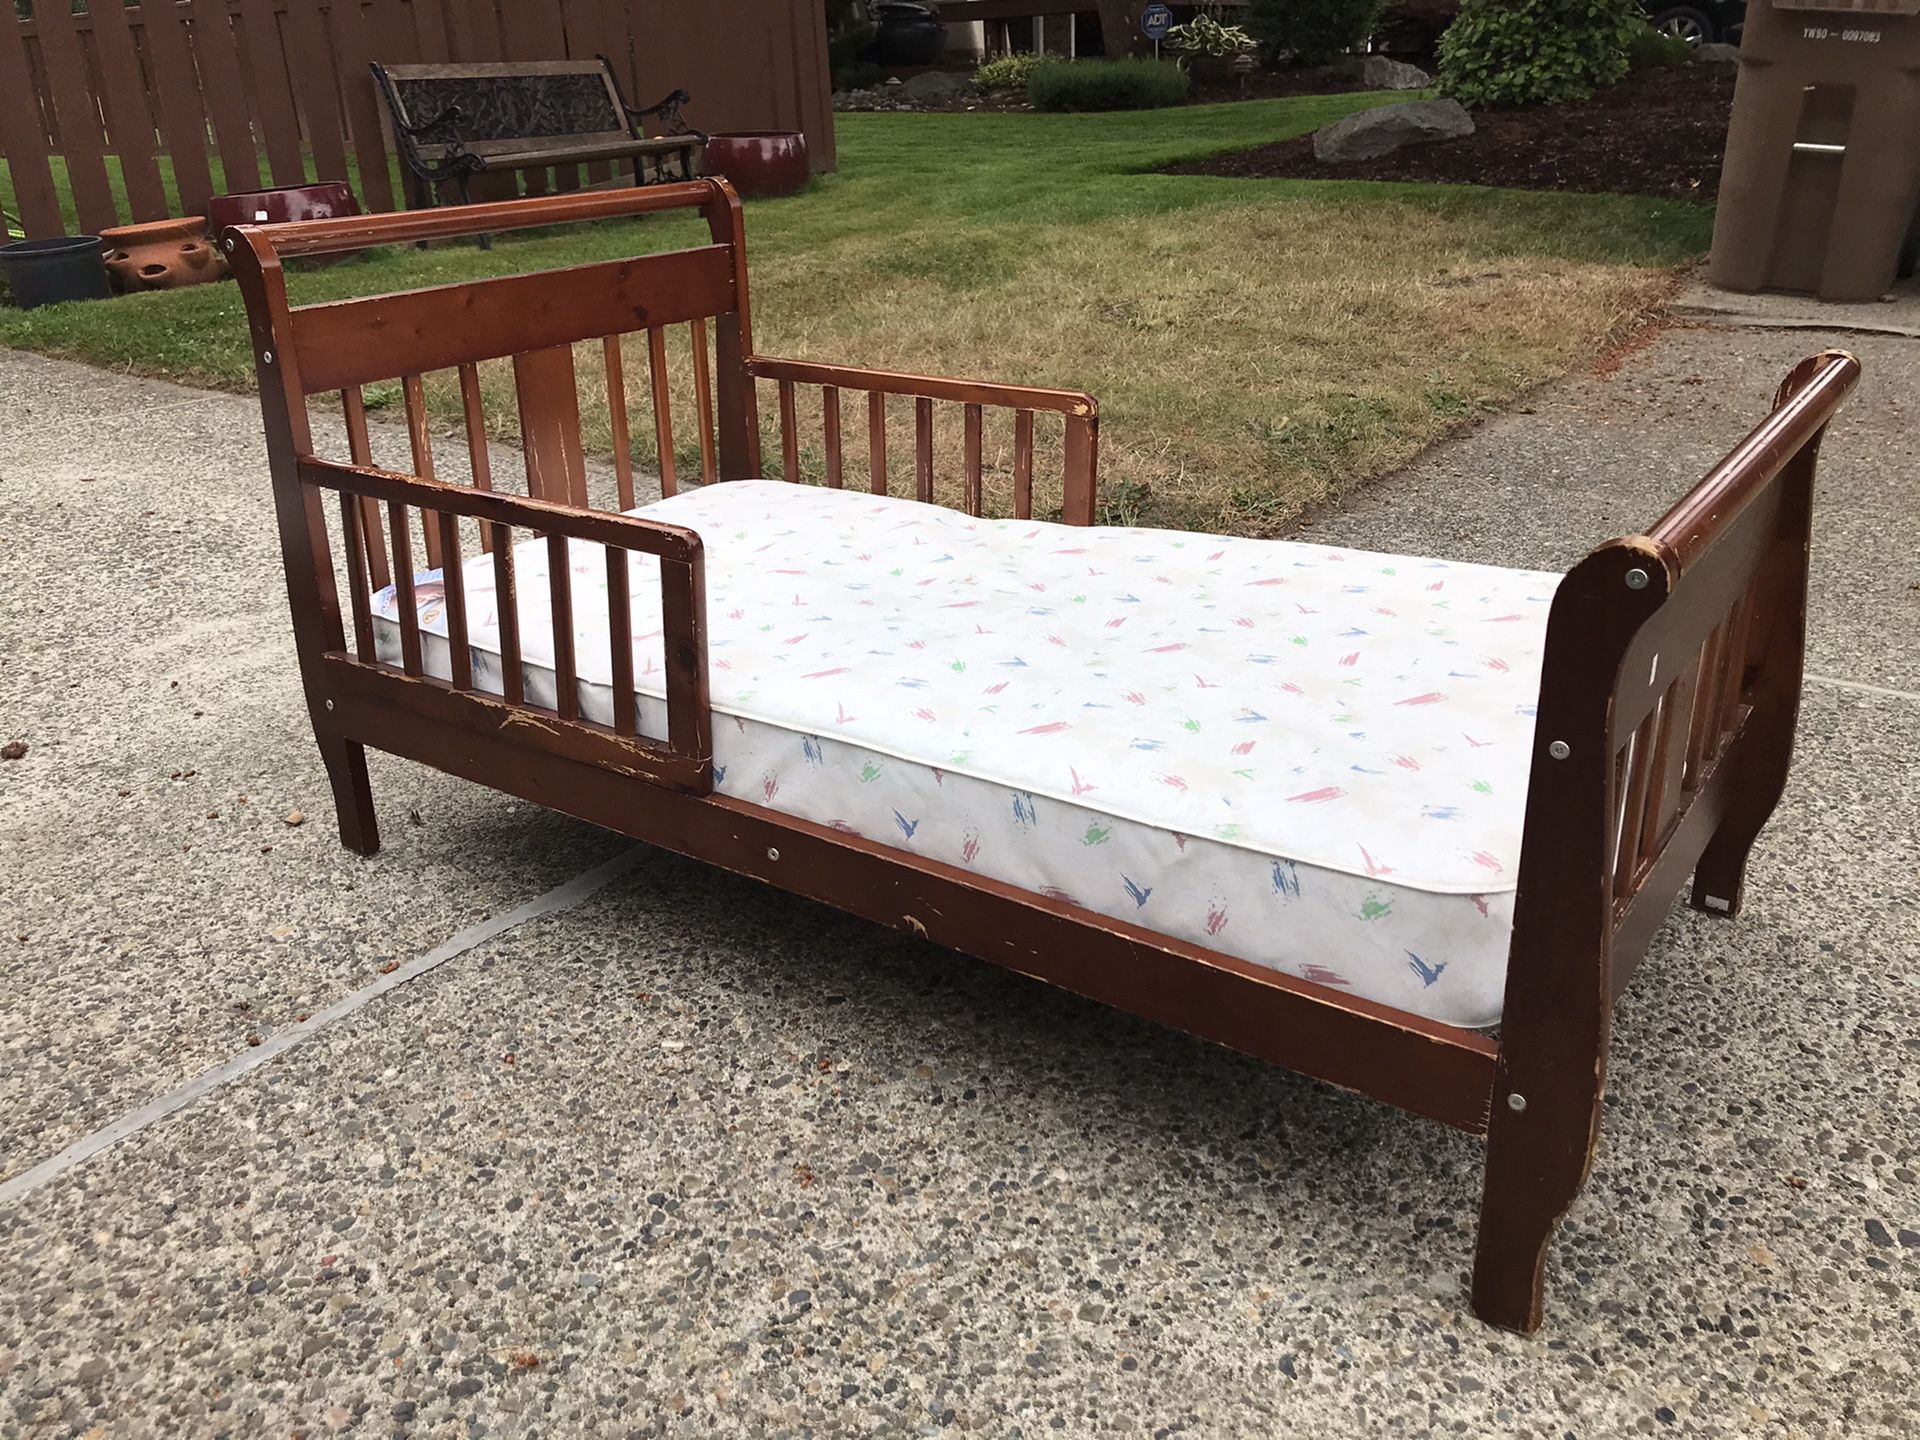 Toddler bed with waterproof mattress and comforter sheet set included.